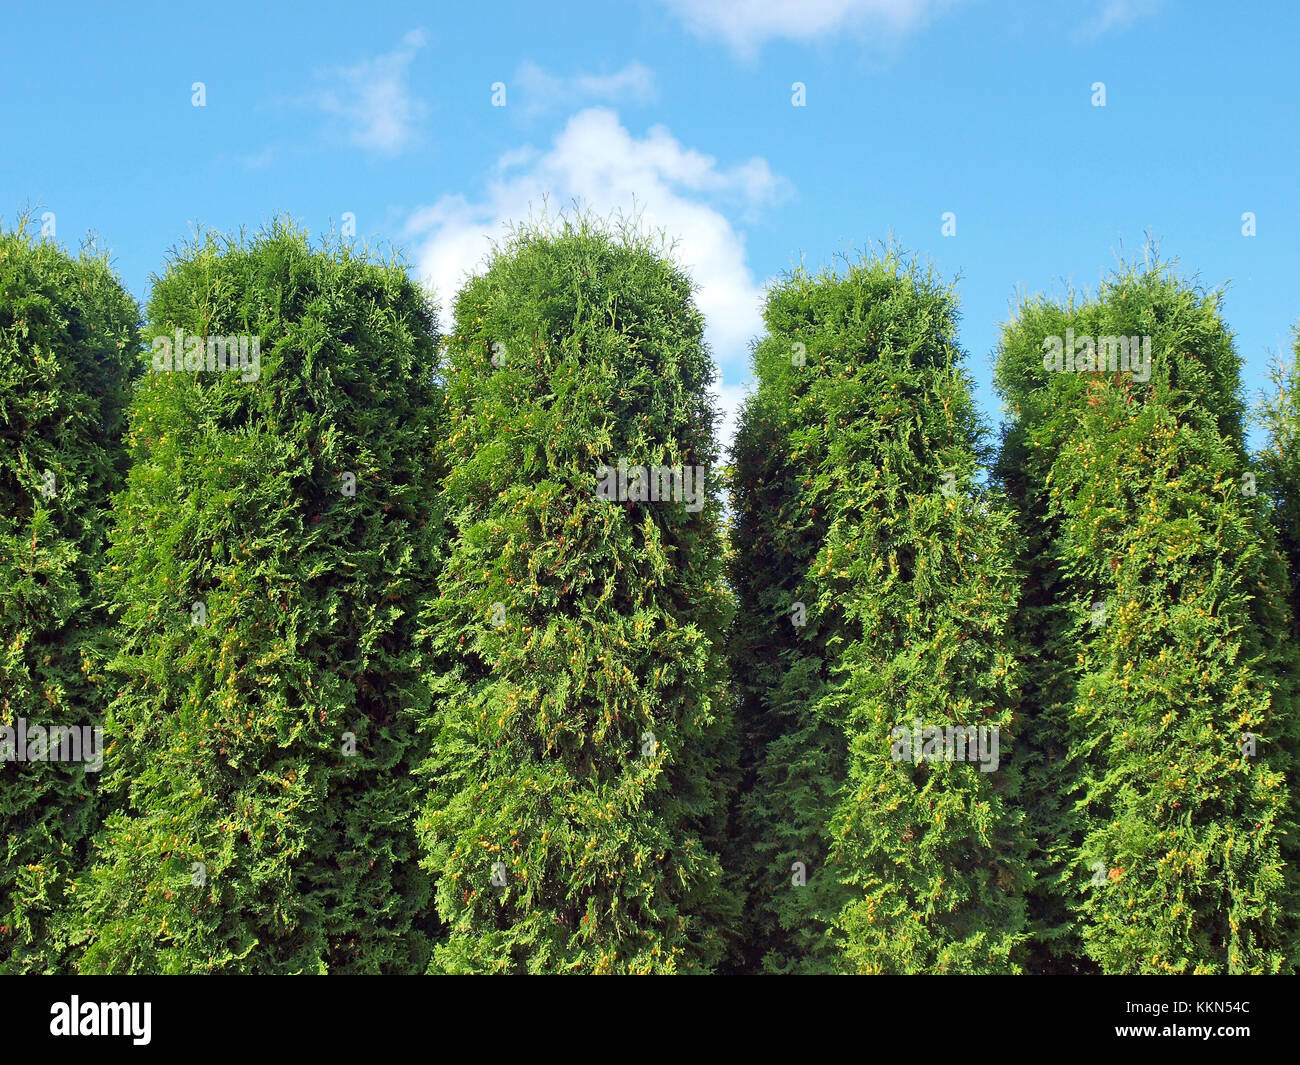 Cypress or thuja hedge top on blue sky background in sunny day Stock Photo